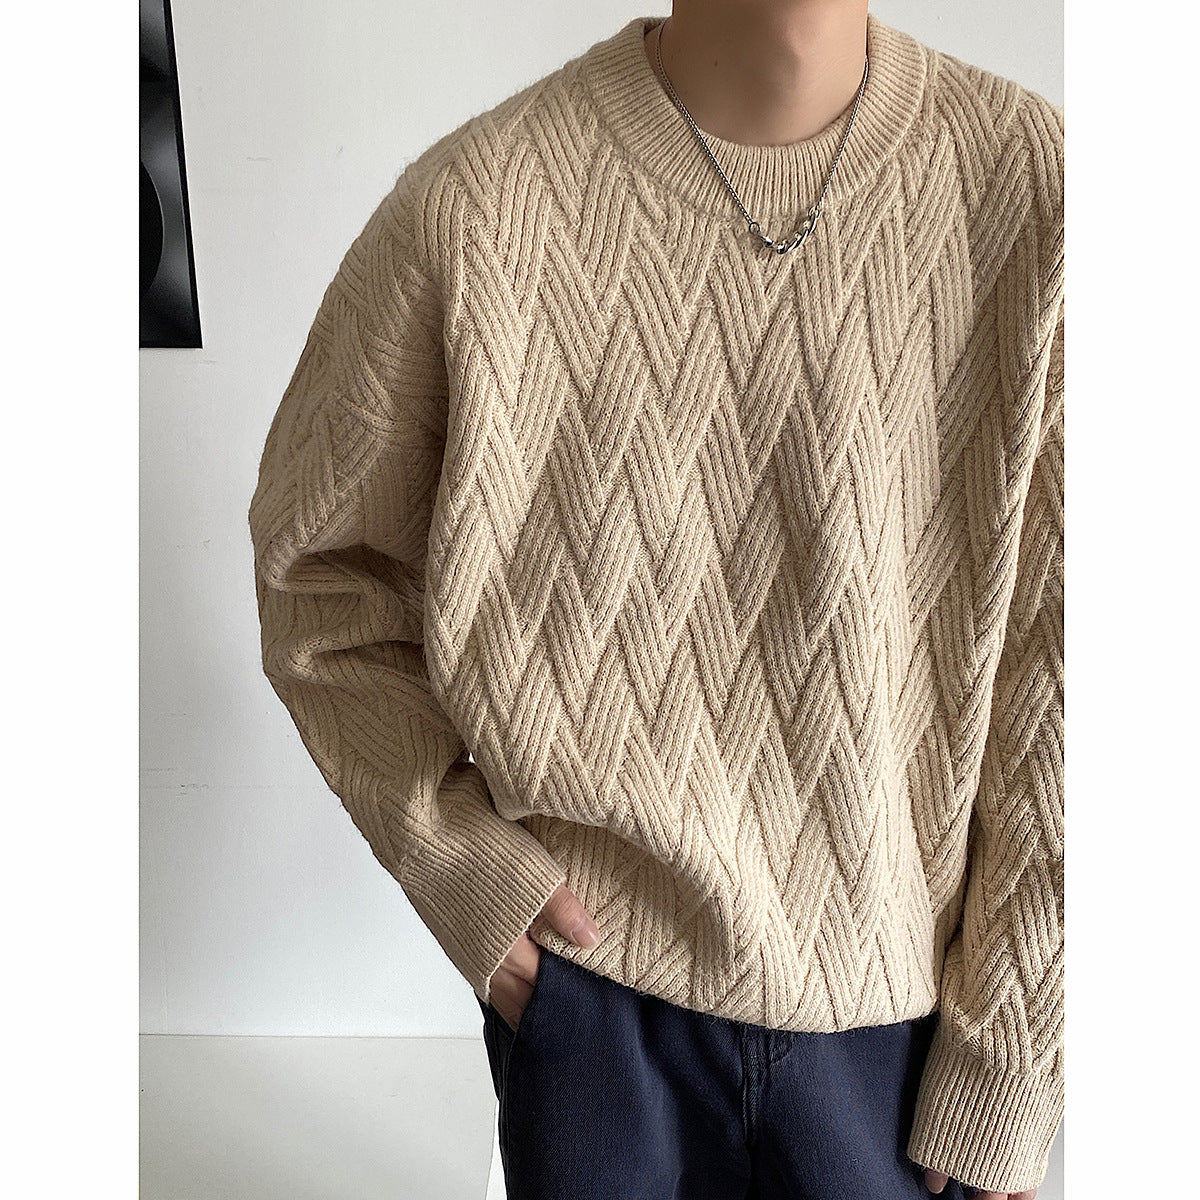 Classic Comfort: Men's Solid Color Non-Pilling Jersey Sweater